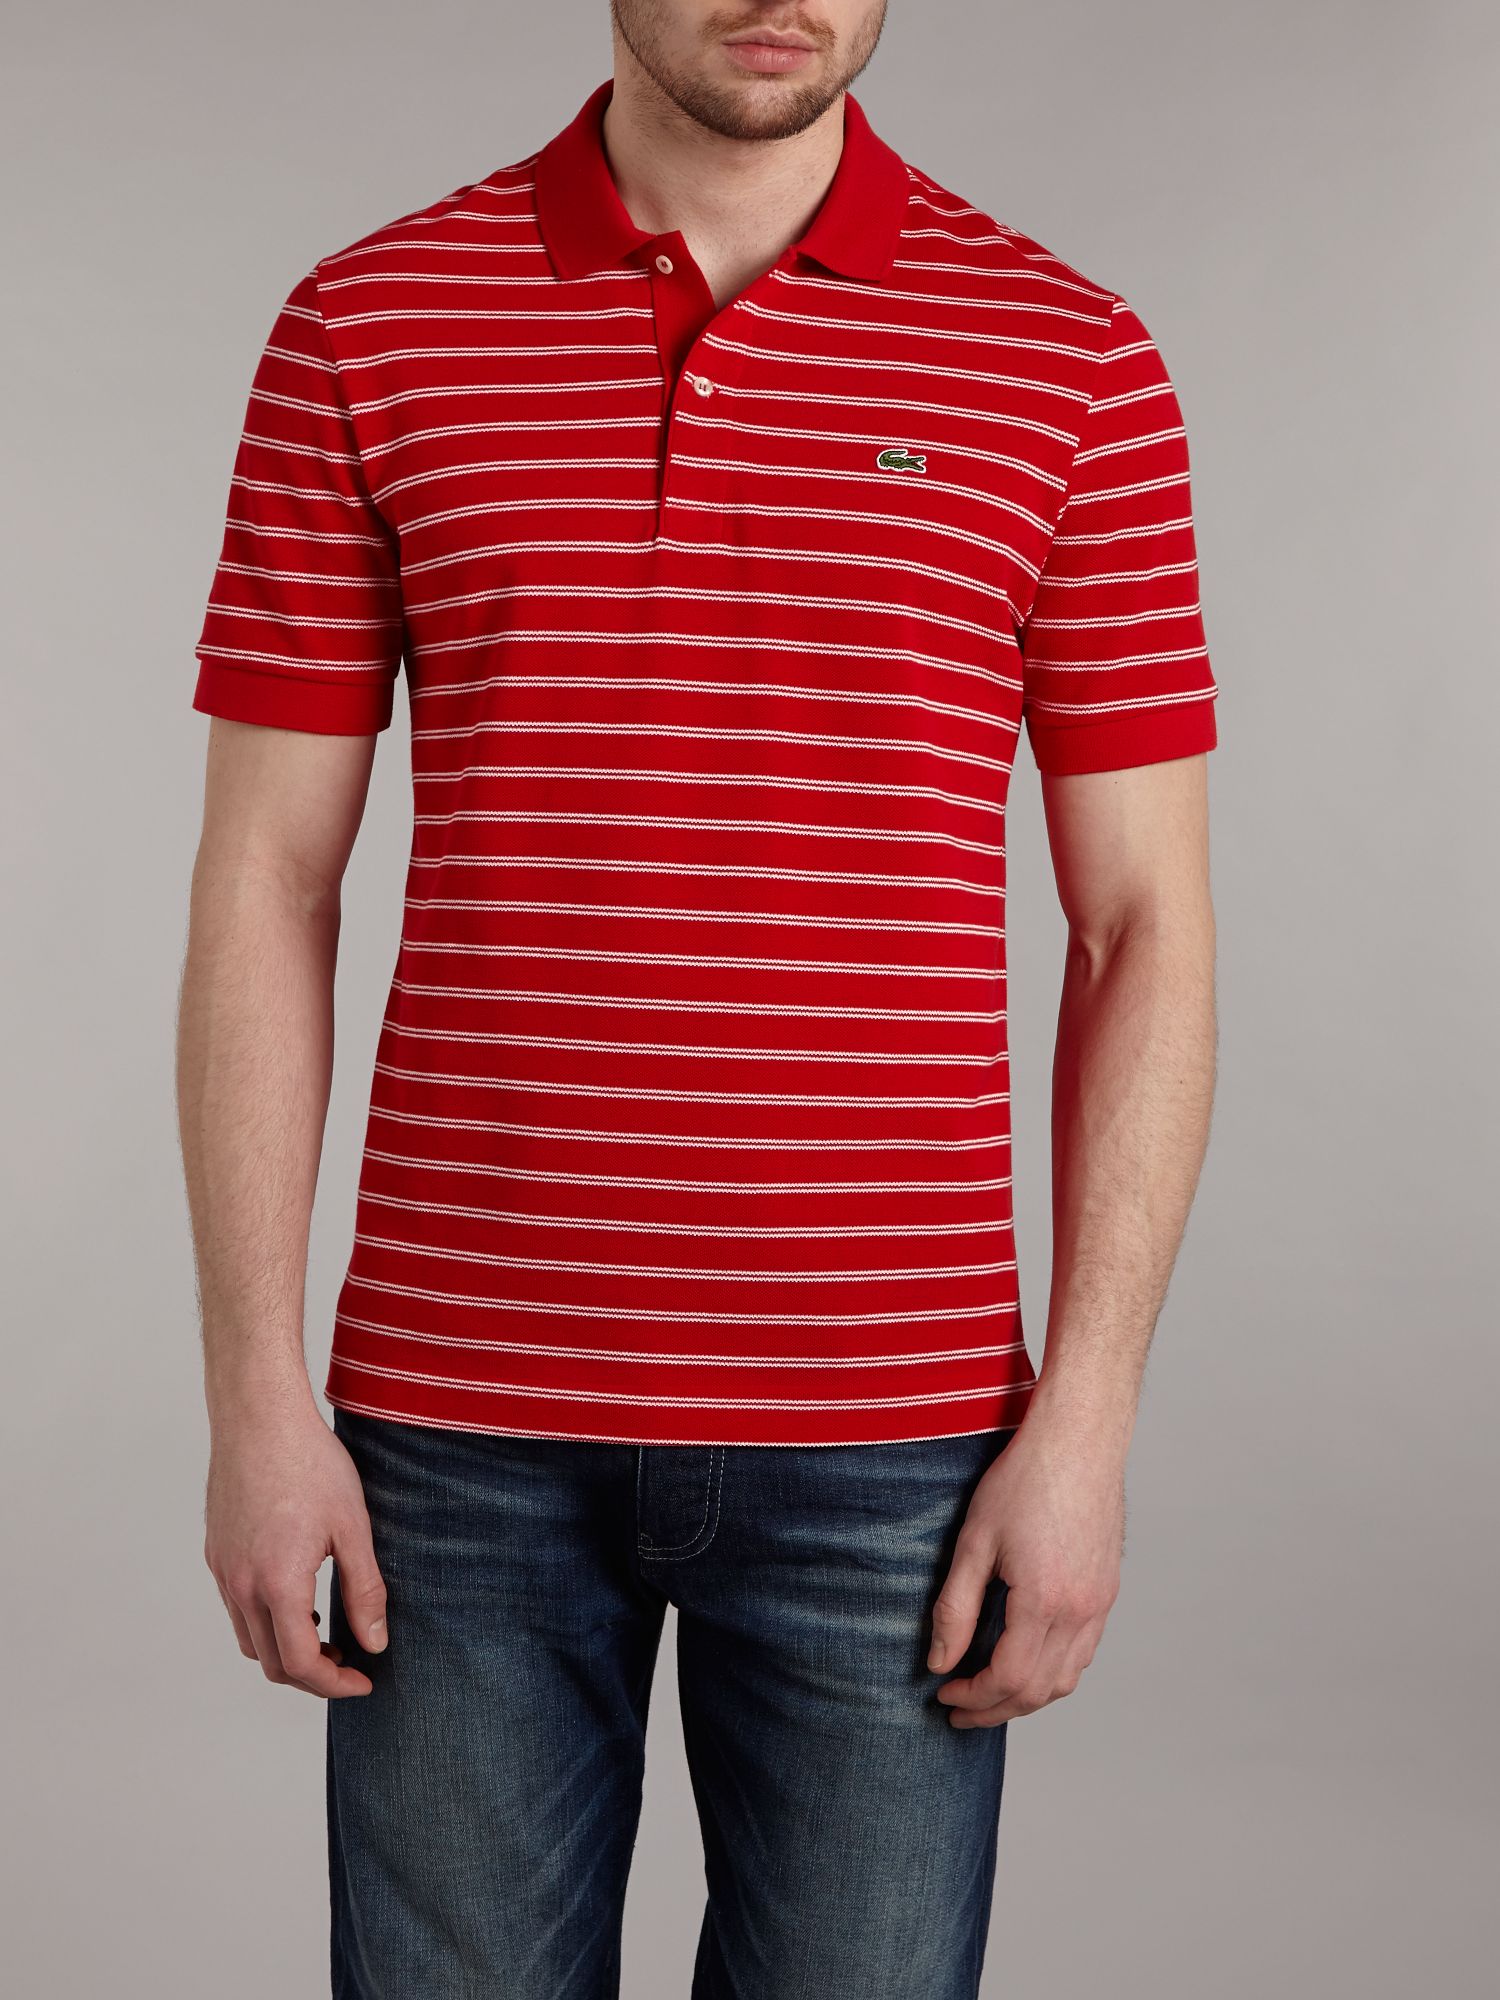 Lacoste Fine Striped Polo Shirt in Red for Men | Lyst